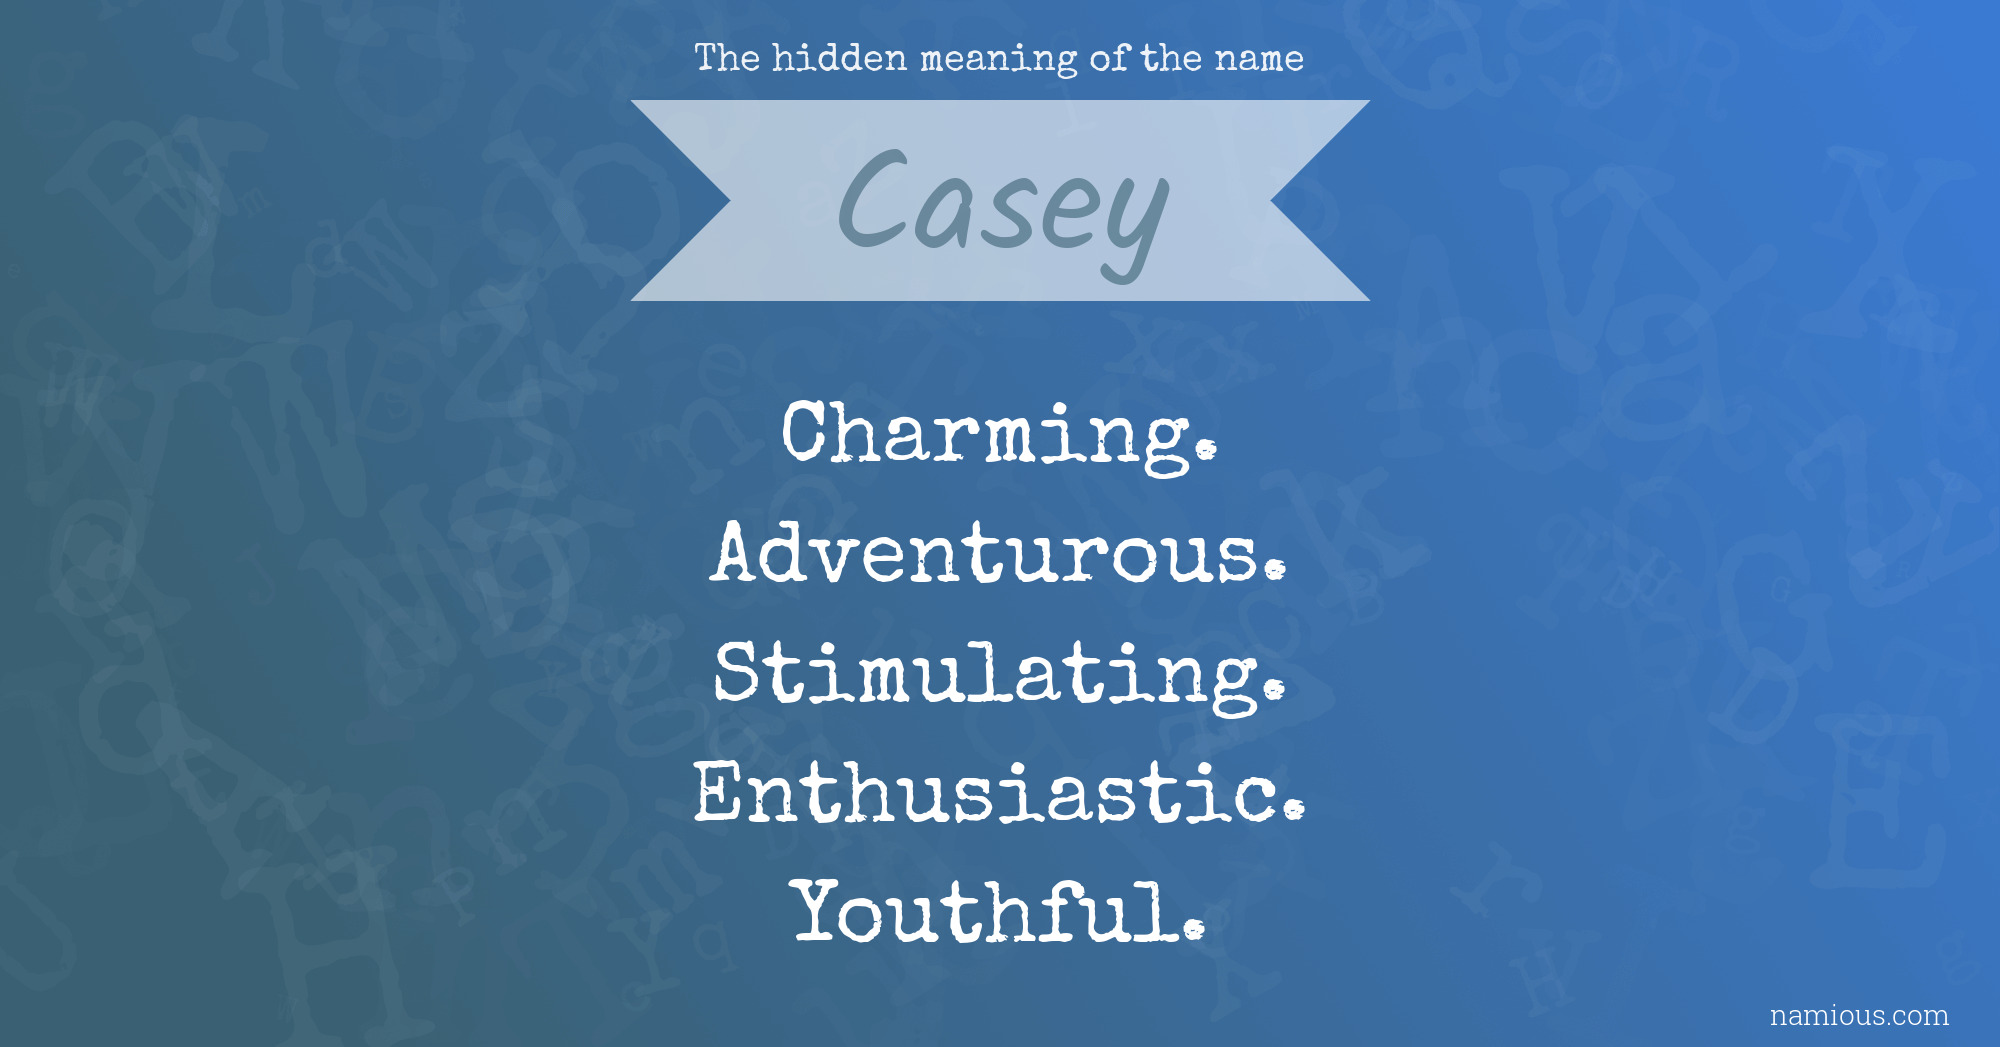 The hidden meaning of the name Casey